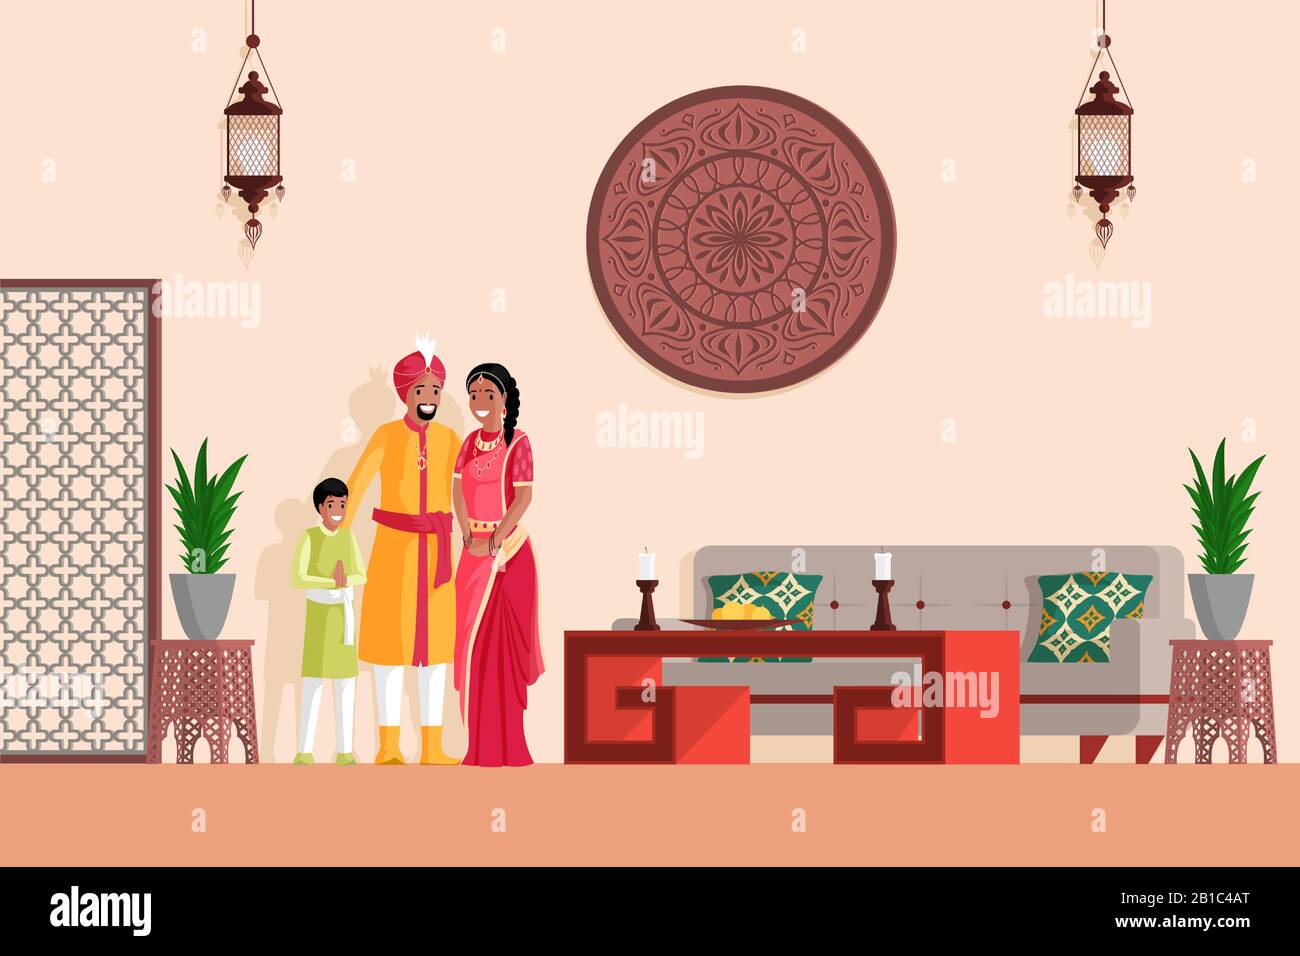 Happy Indian family in Arabian or Indian style designed living room vector flat illustration. Smiling mother, father and son in national clothes standing together in home decorated in oriental style. Stock Vector